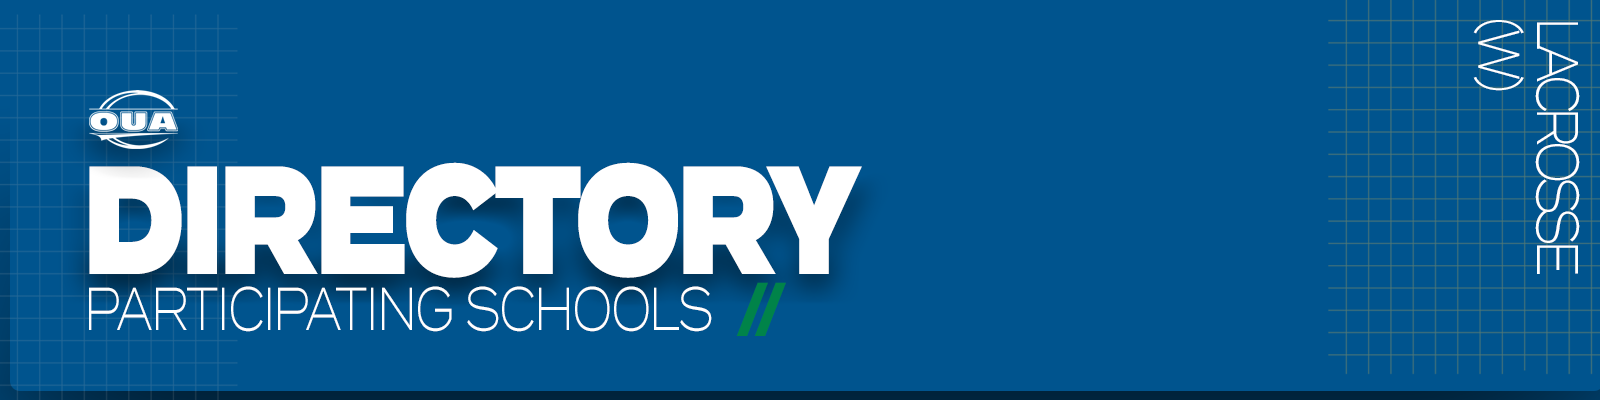 Predominantly blue graphic with large white text on the left side that reads 'Directory, Participating Schools' and small white vertical text on the right side that reads 'Lacrosse'